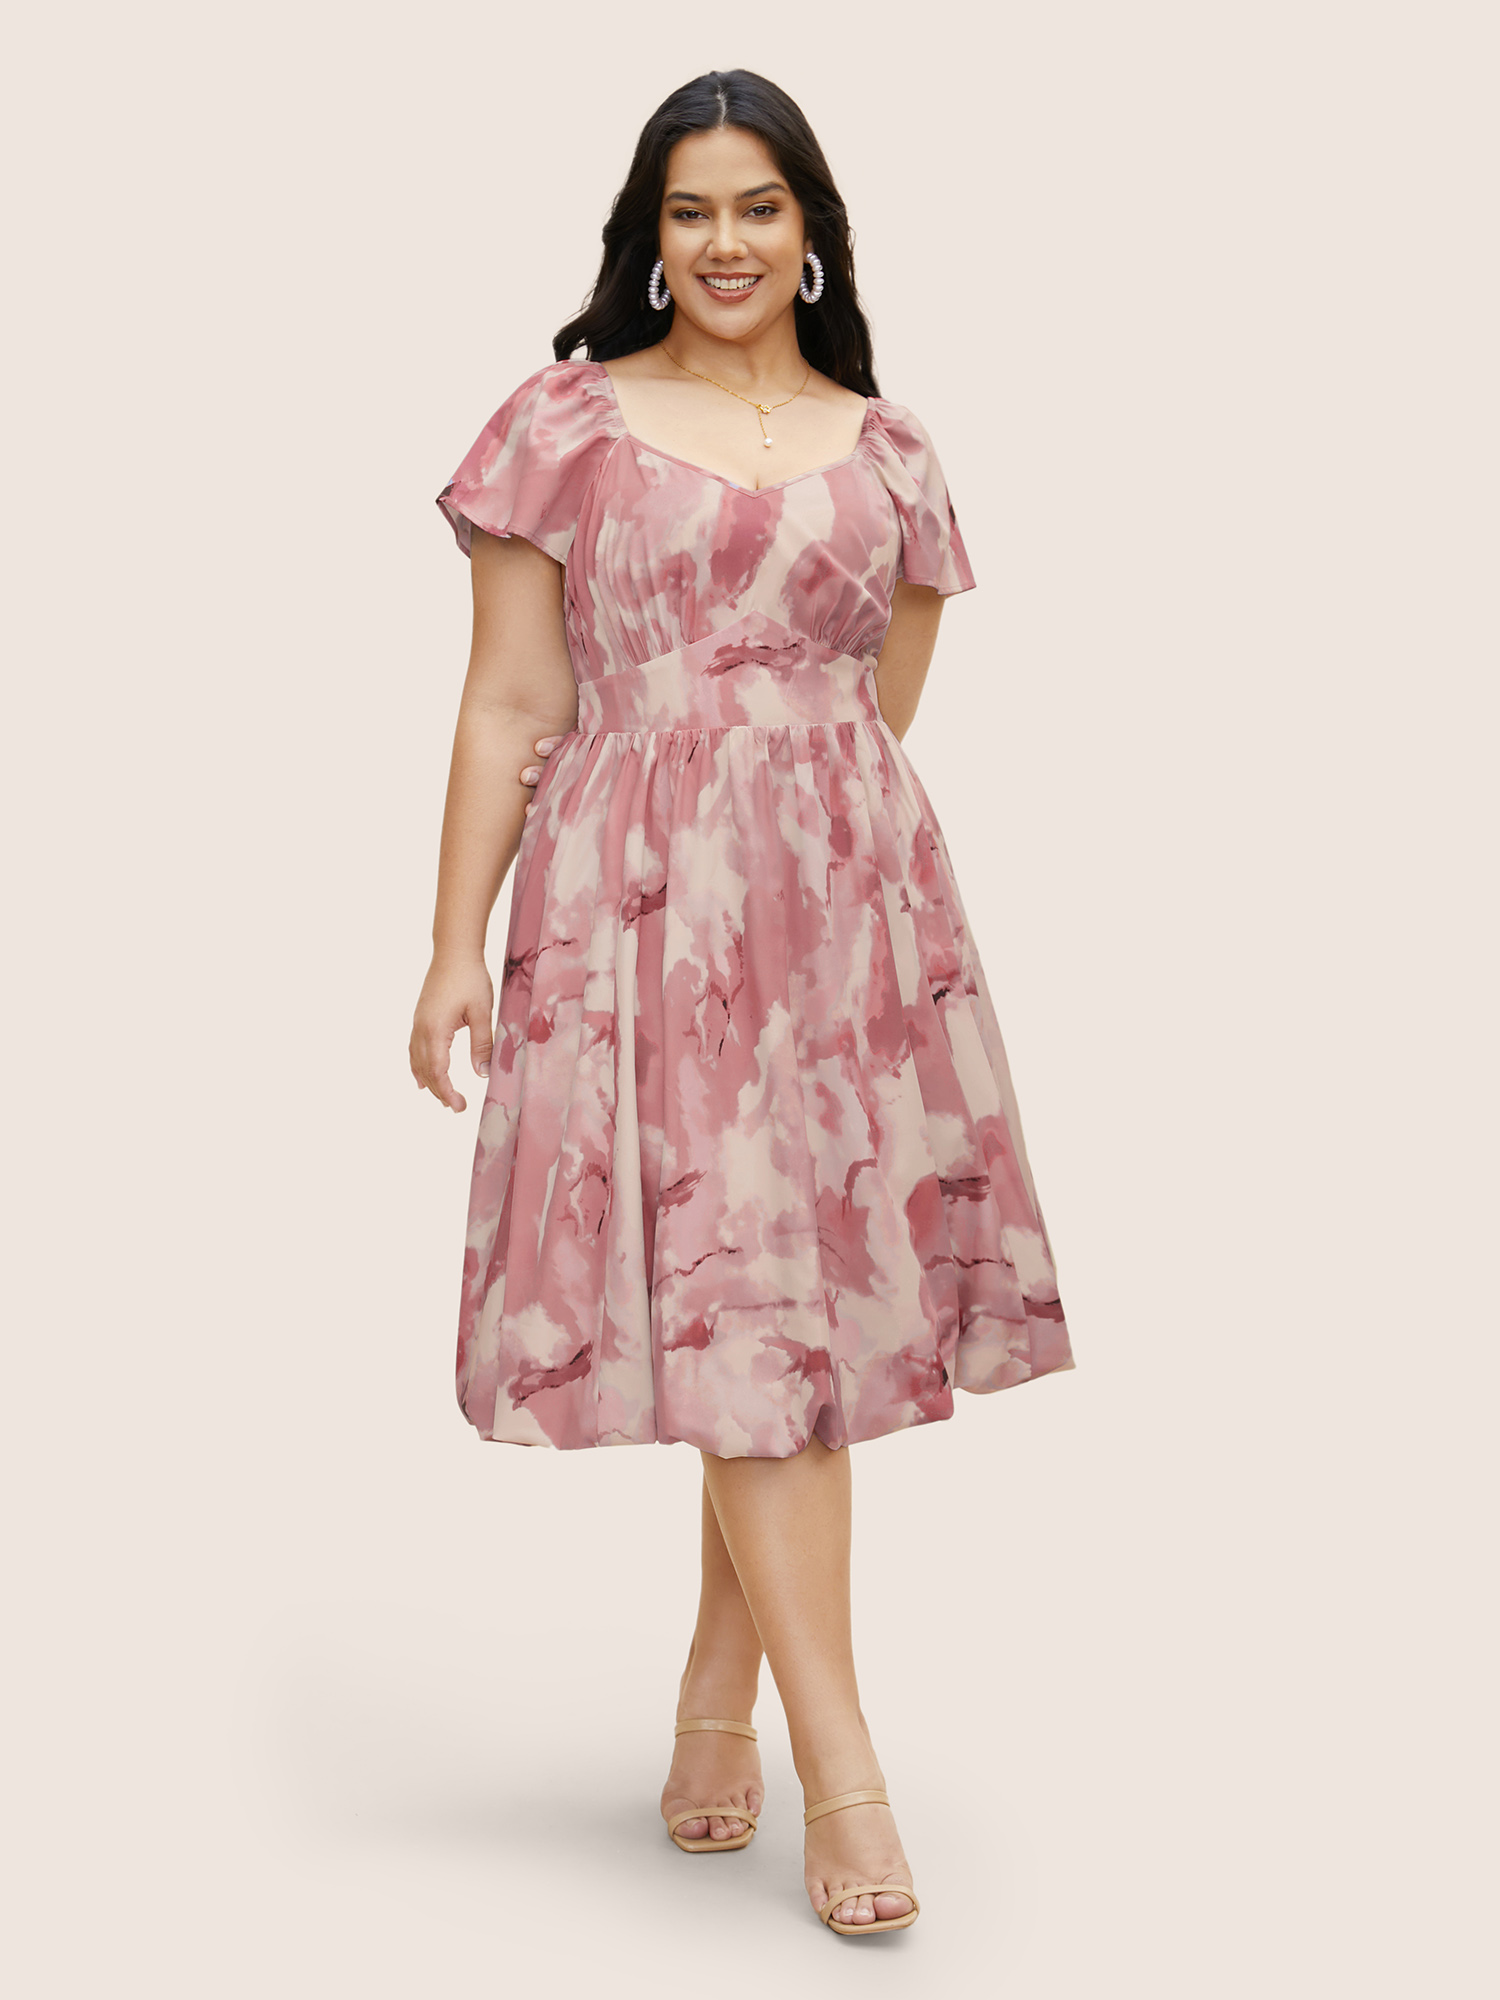 

Plus Size Watercolor Floral Ruffles Shirred Gathered Dress Dirtypink Women Gathered Heart neckline Cap Sleeve Curvy BloomChic